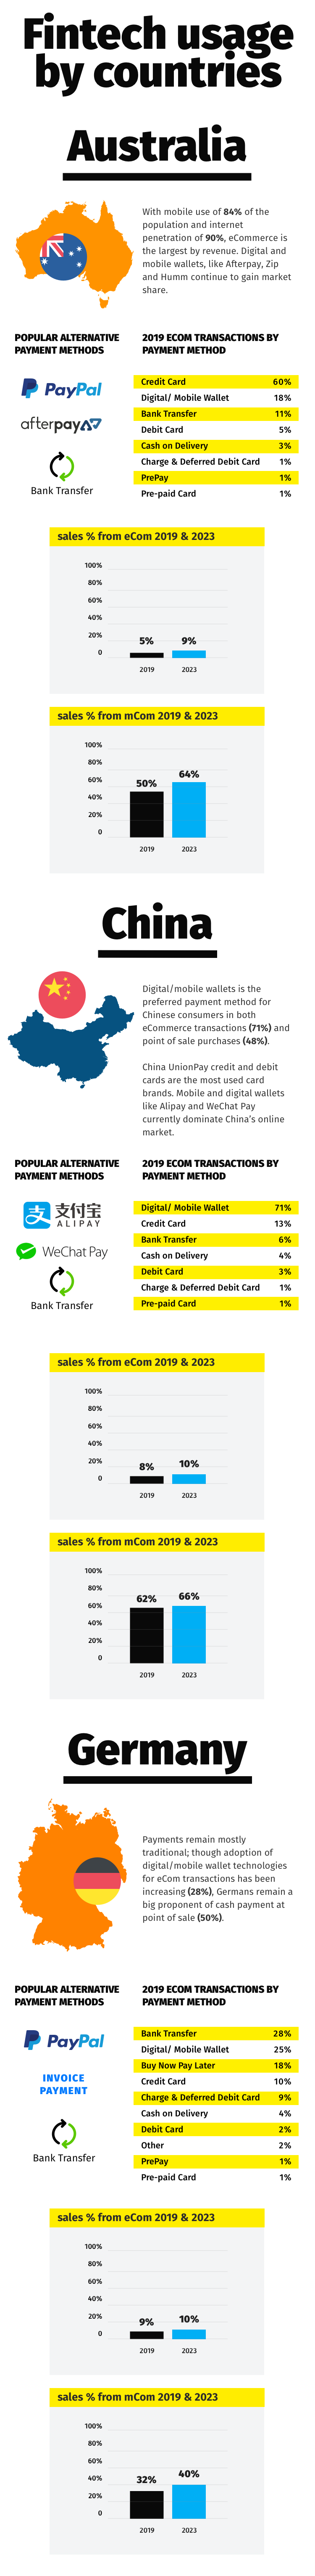 Infographic: Fintech Overview and Trends 2021 - 2023 - 25